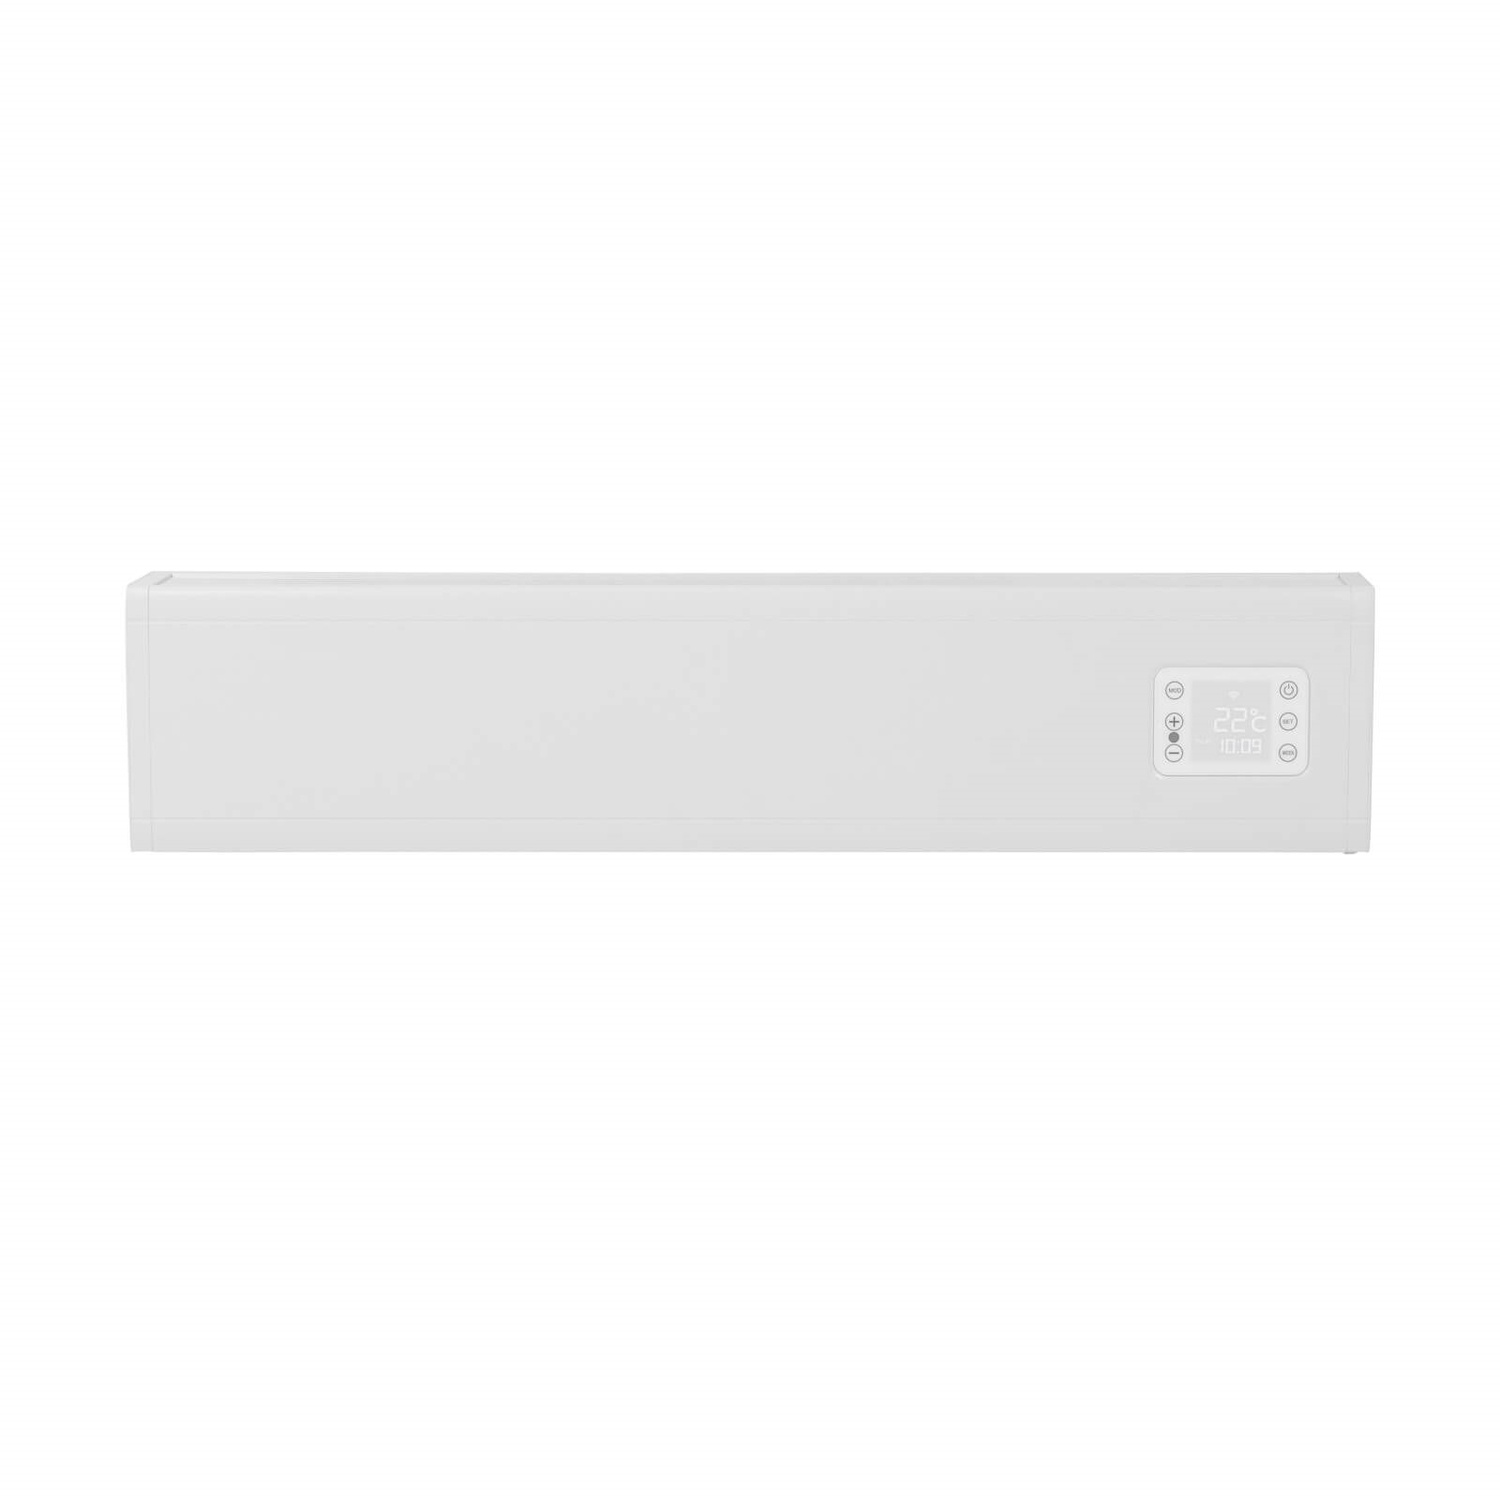 Convector Verwarming Eurom Alutherm Baseboard 1000W Laag Model met Wi-Fi Wit Eurom